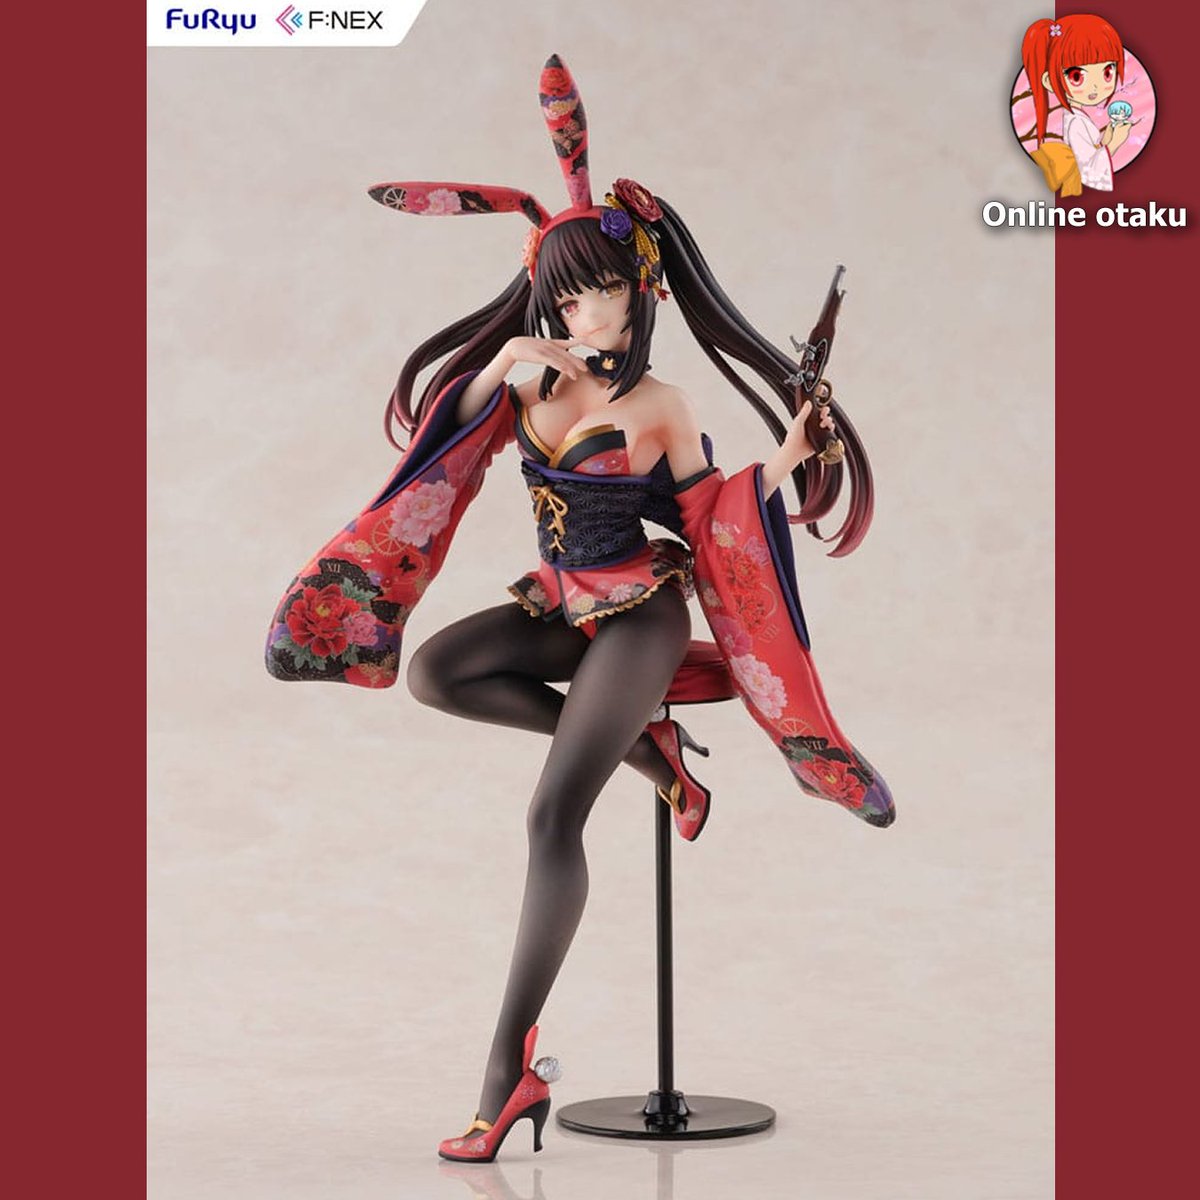 🐰 Bring a touch of elegance to your collection with our Date A Live  PVC Statue of Kurumi Tokisaki in Wa-bunny attire! Order now and let this captivating figure grace your display: online-otaku.com/en/shop/item/2… #DateALive #KurumiTokisaki #OnlineOtaku #AnimeFigure #FigureCollection